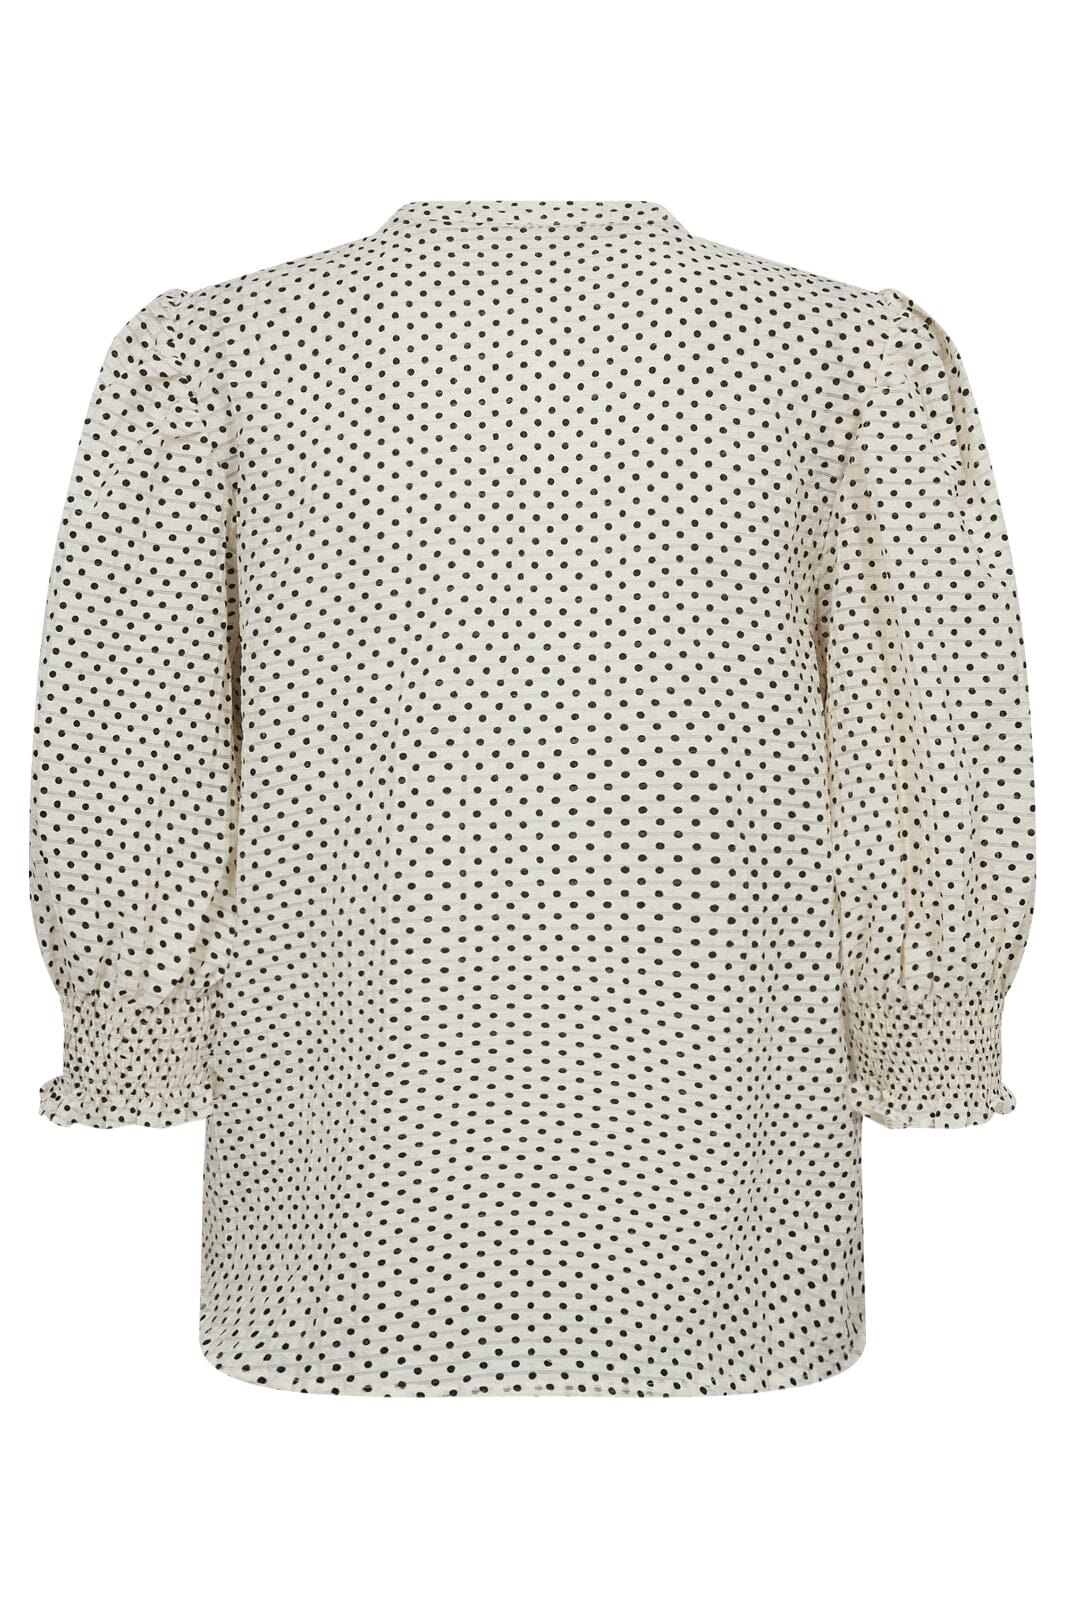 Co´couture - Chesscc Dot Ss Shirt 35434 - 11 Off White Bluser 